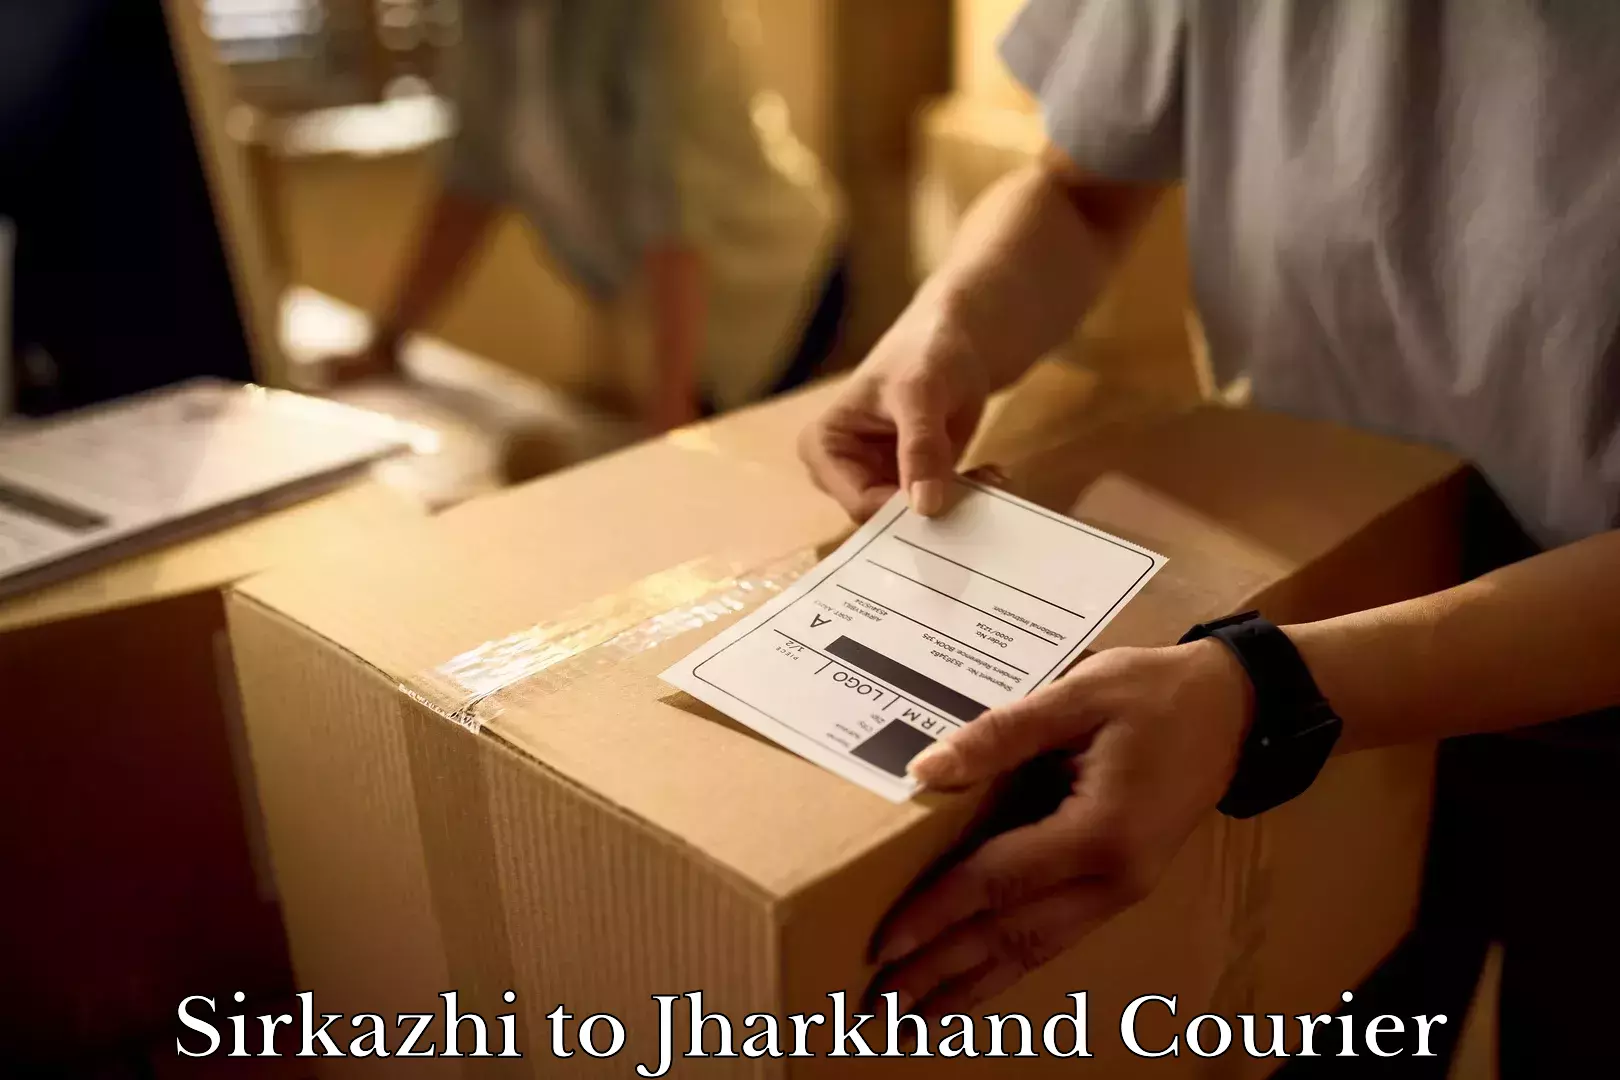 Furniture moving specialists Sirkazhi to Peterbar